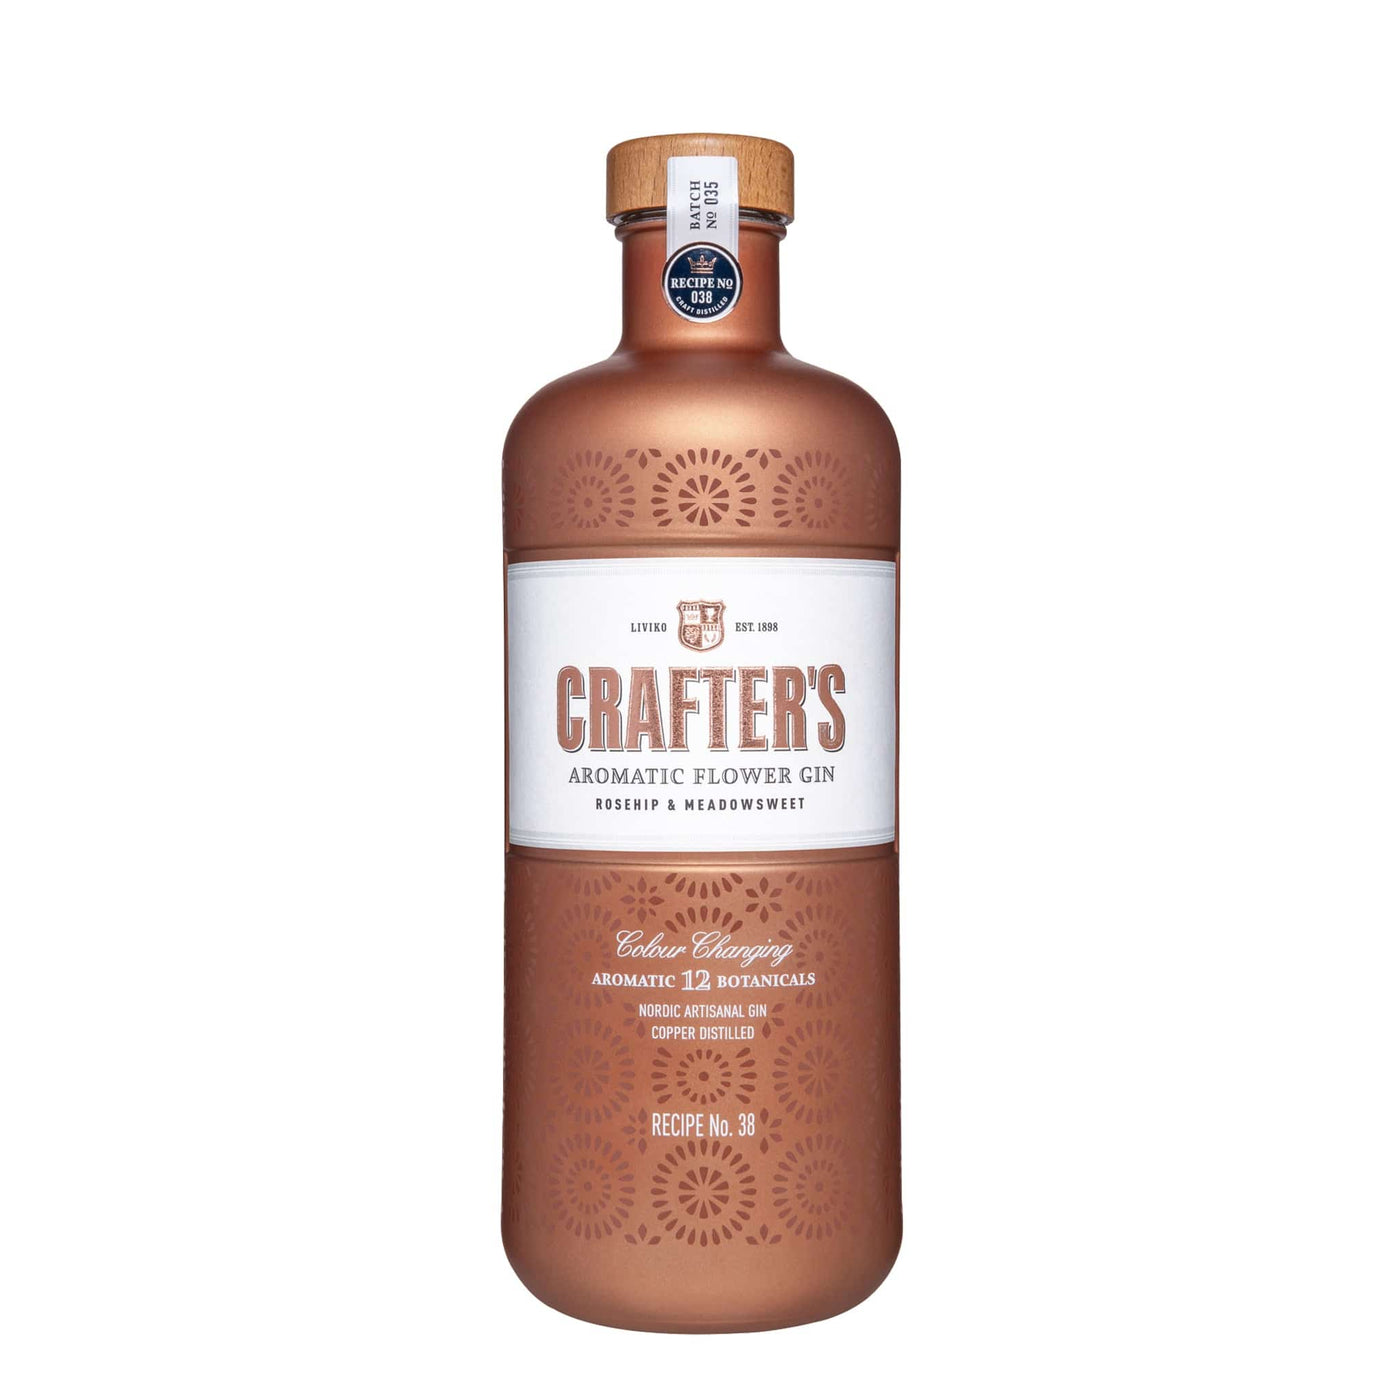 Crafters Aromatic Flower Gin - Spiritly